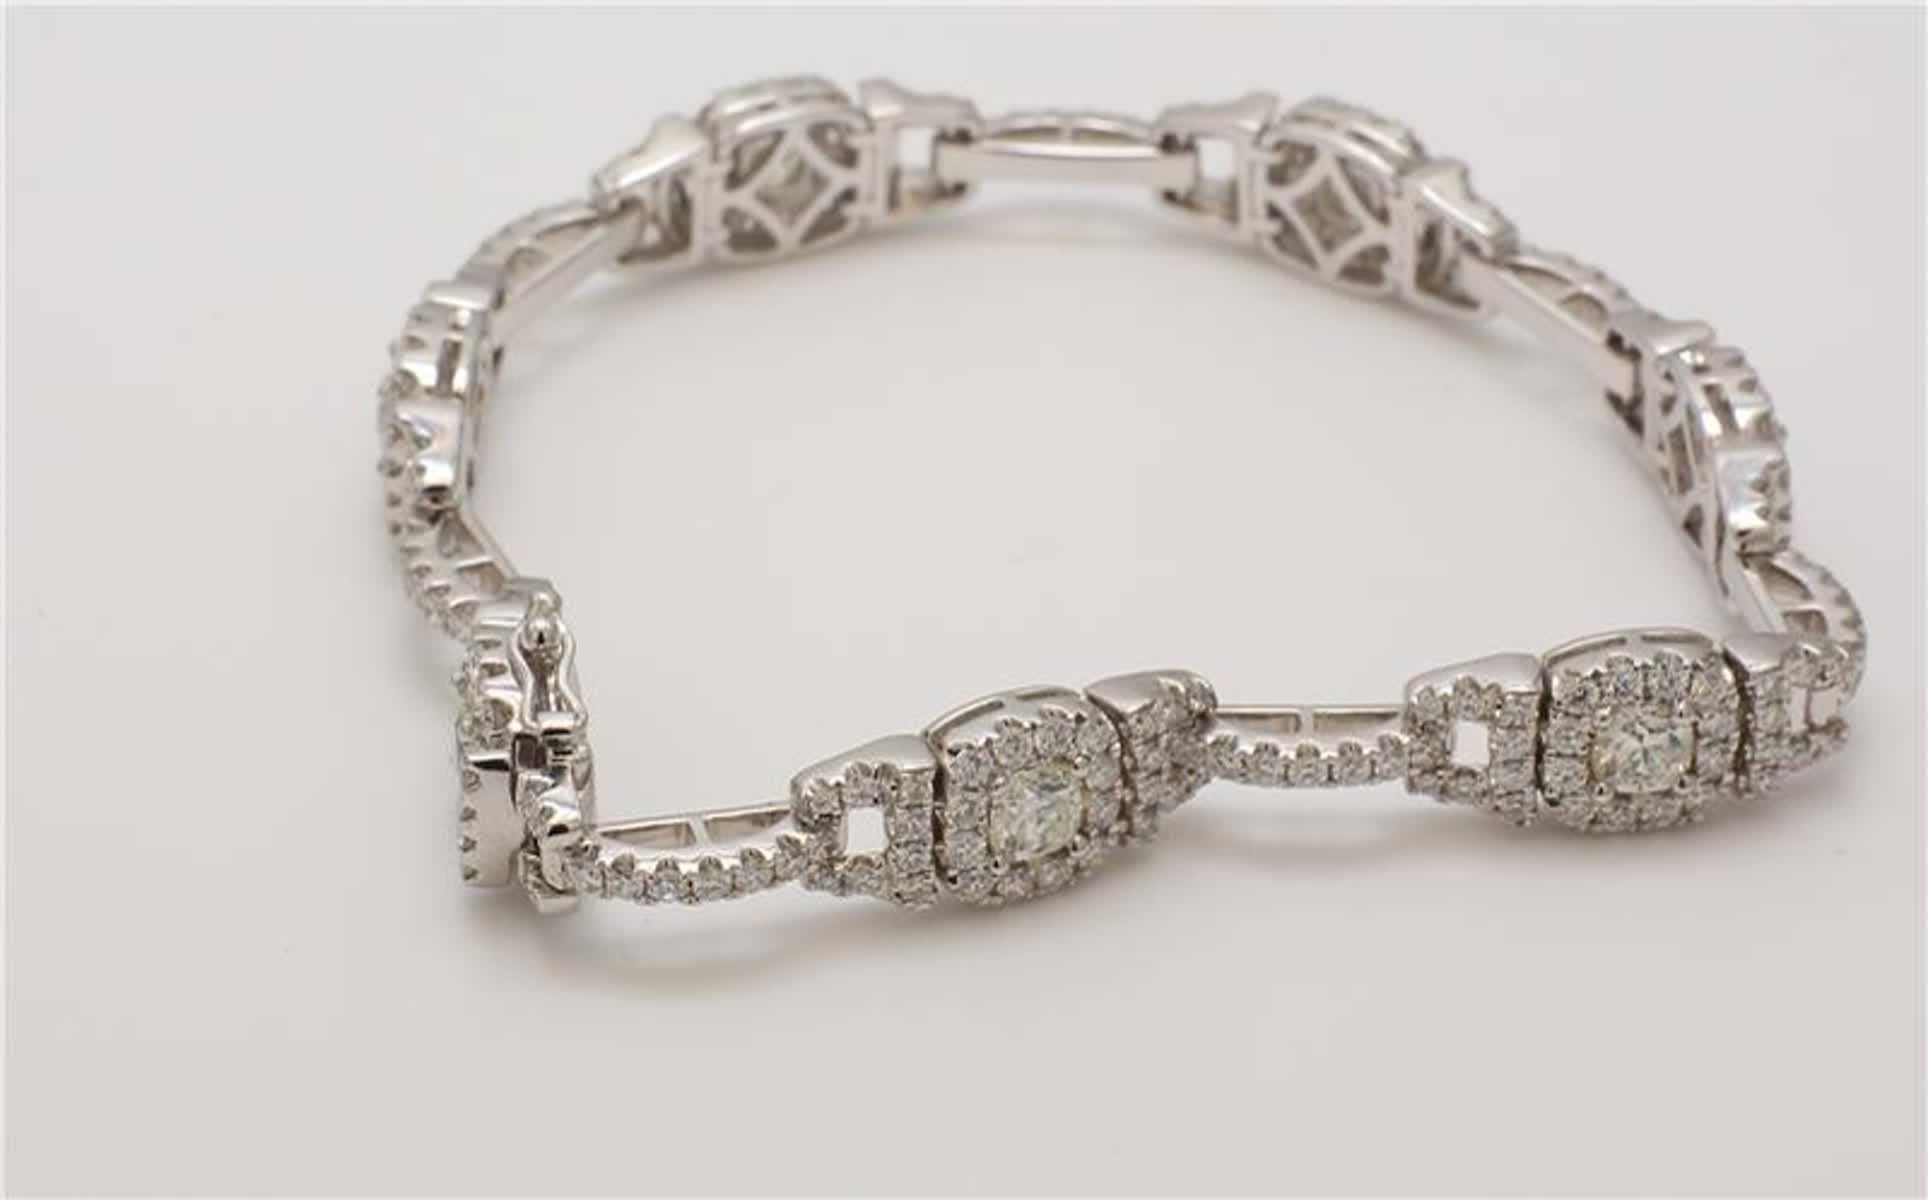 Rare cushion white diamonds surrounded by round white diamonds This bracelet is designed to be placed in a simple but intriguing setting. Can be used as a tennis bracelet or in addition to your collection of jewels.

Total Weight: